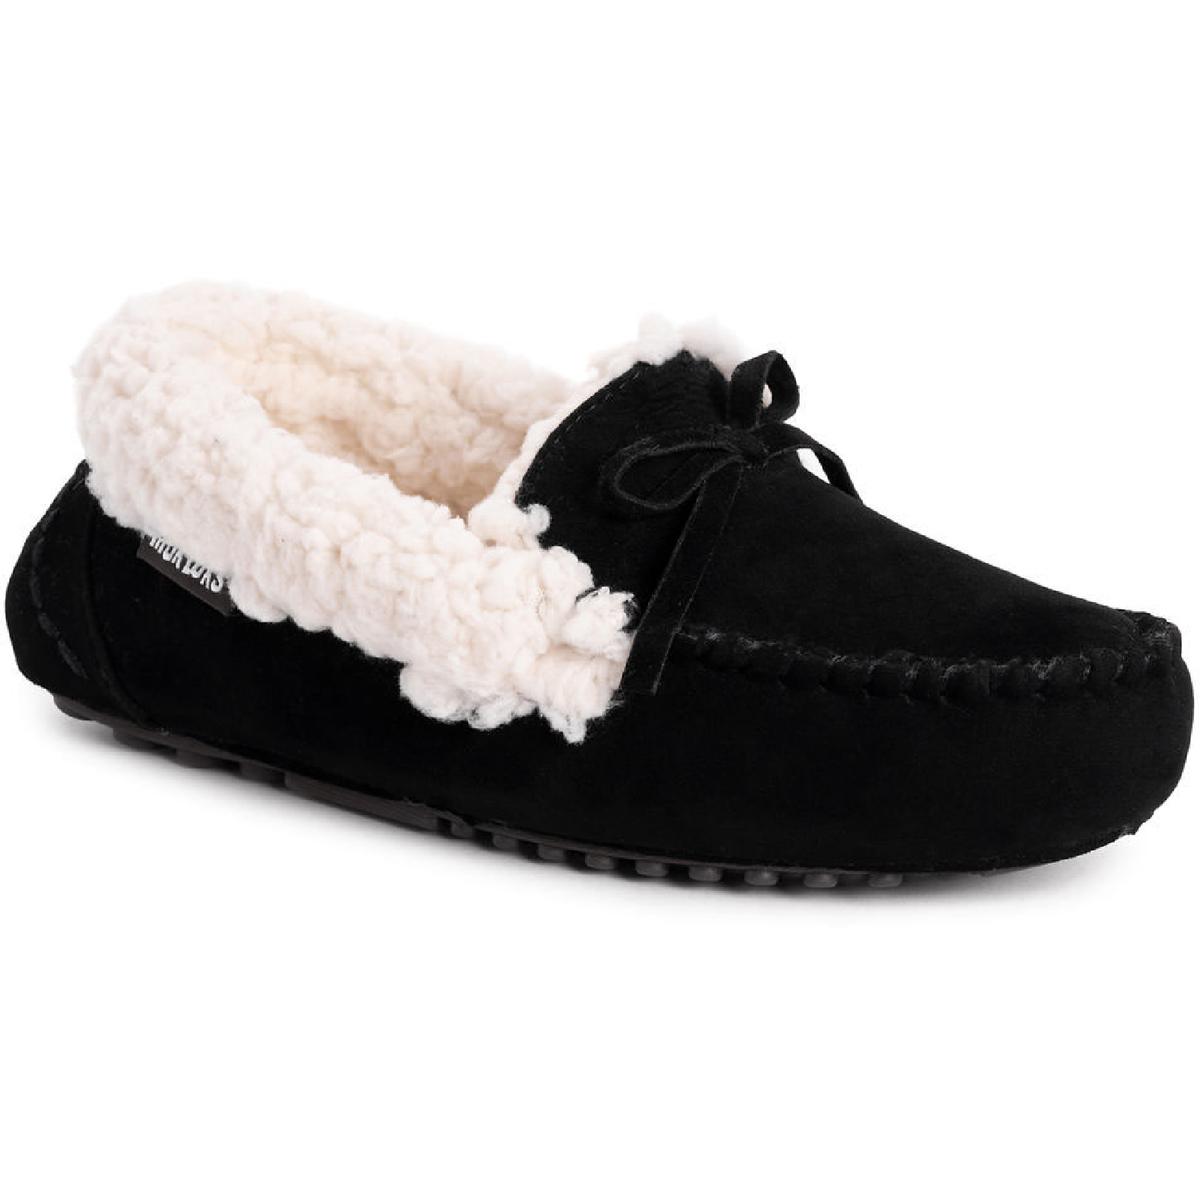 Muk Luks S Jaylah Womens Faux Suede Comfy Loafer Slippers